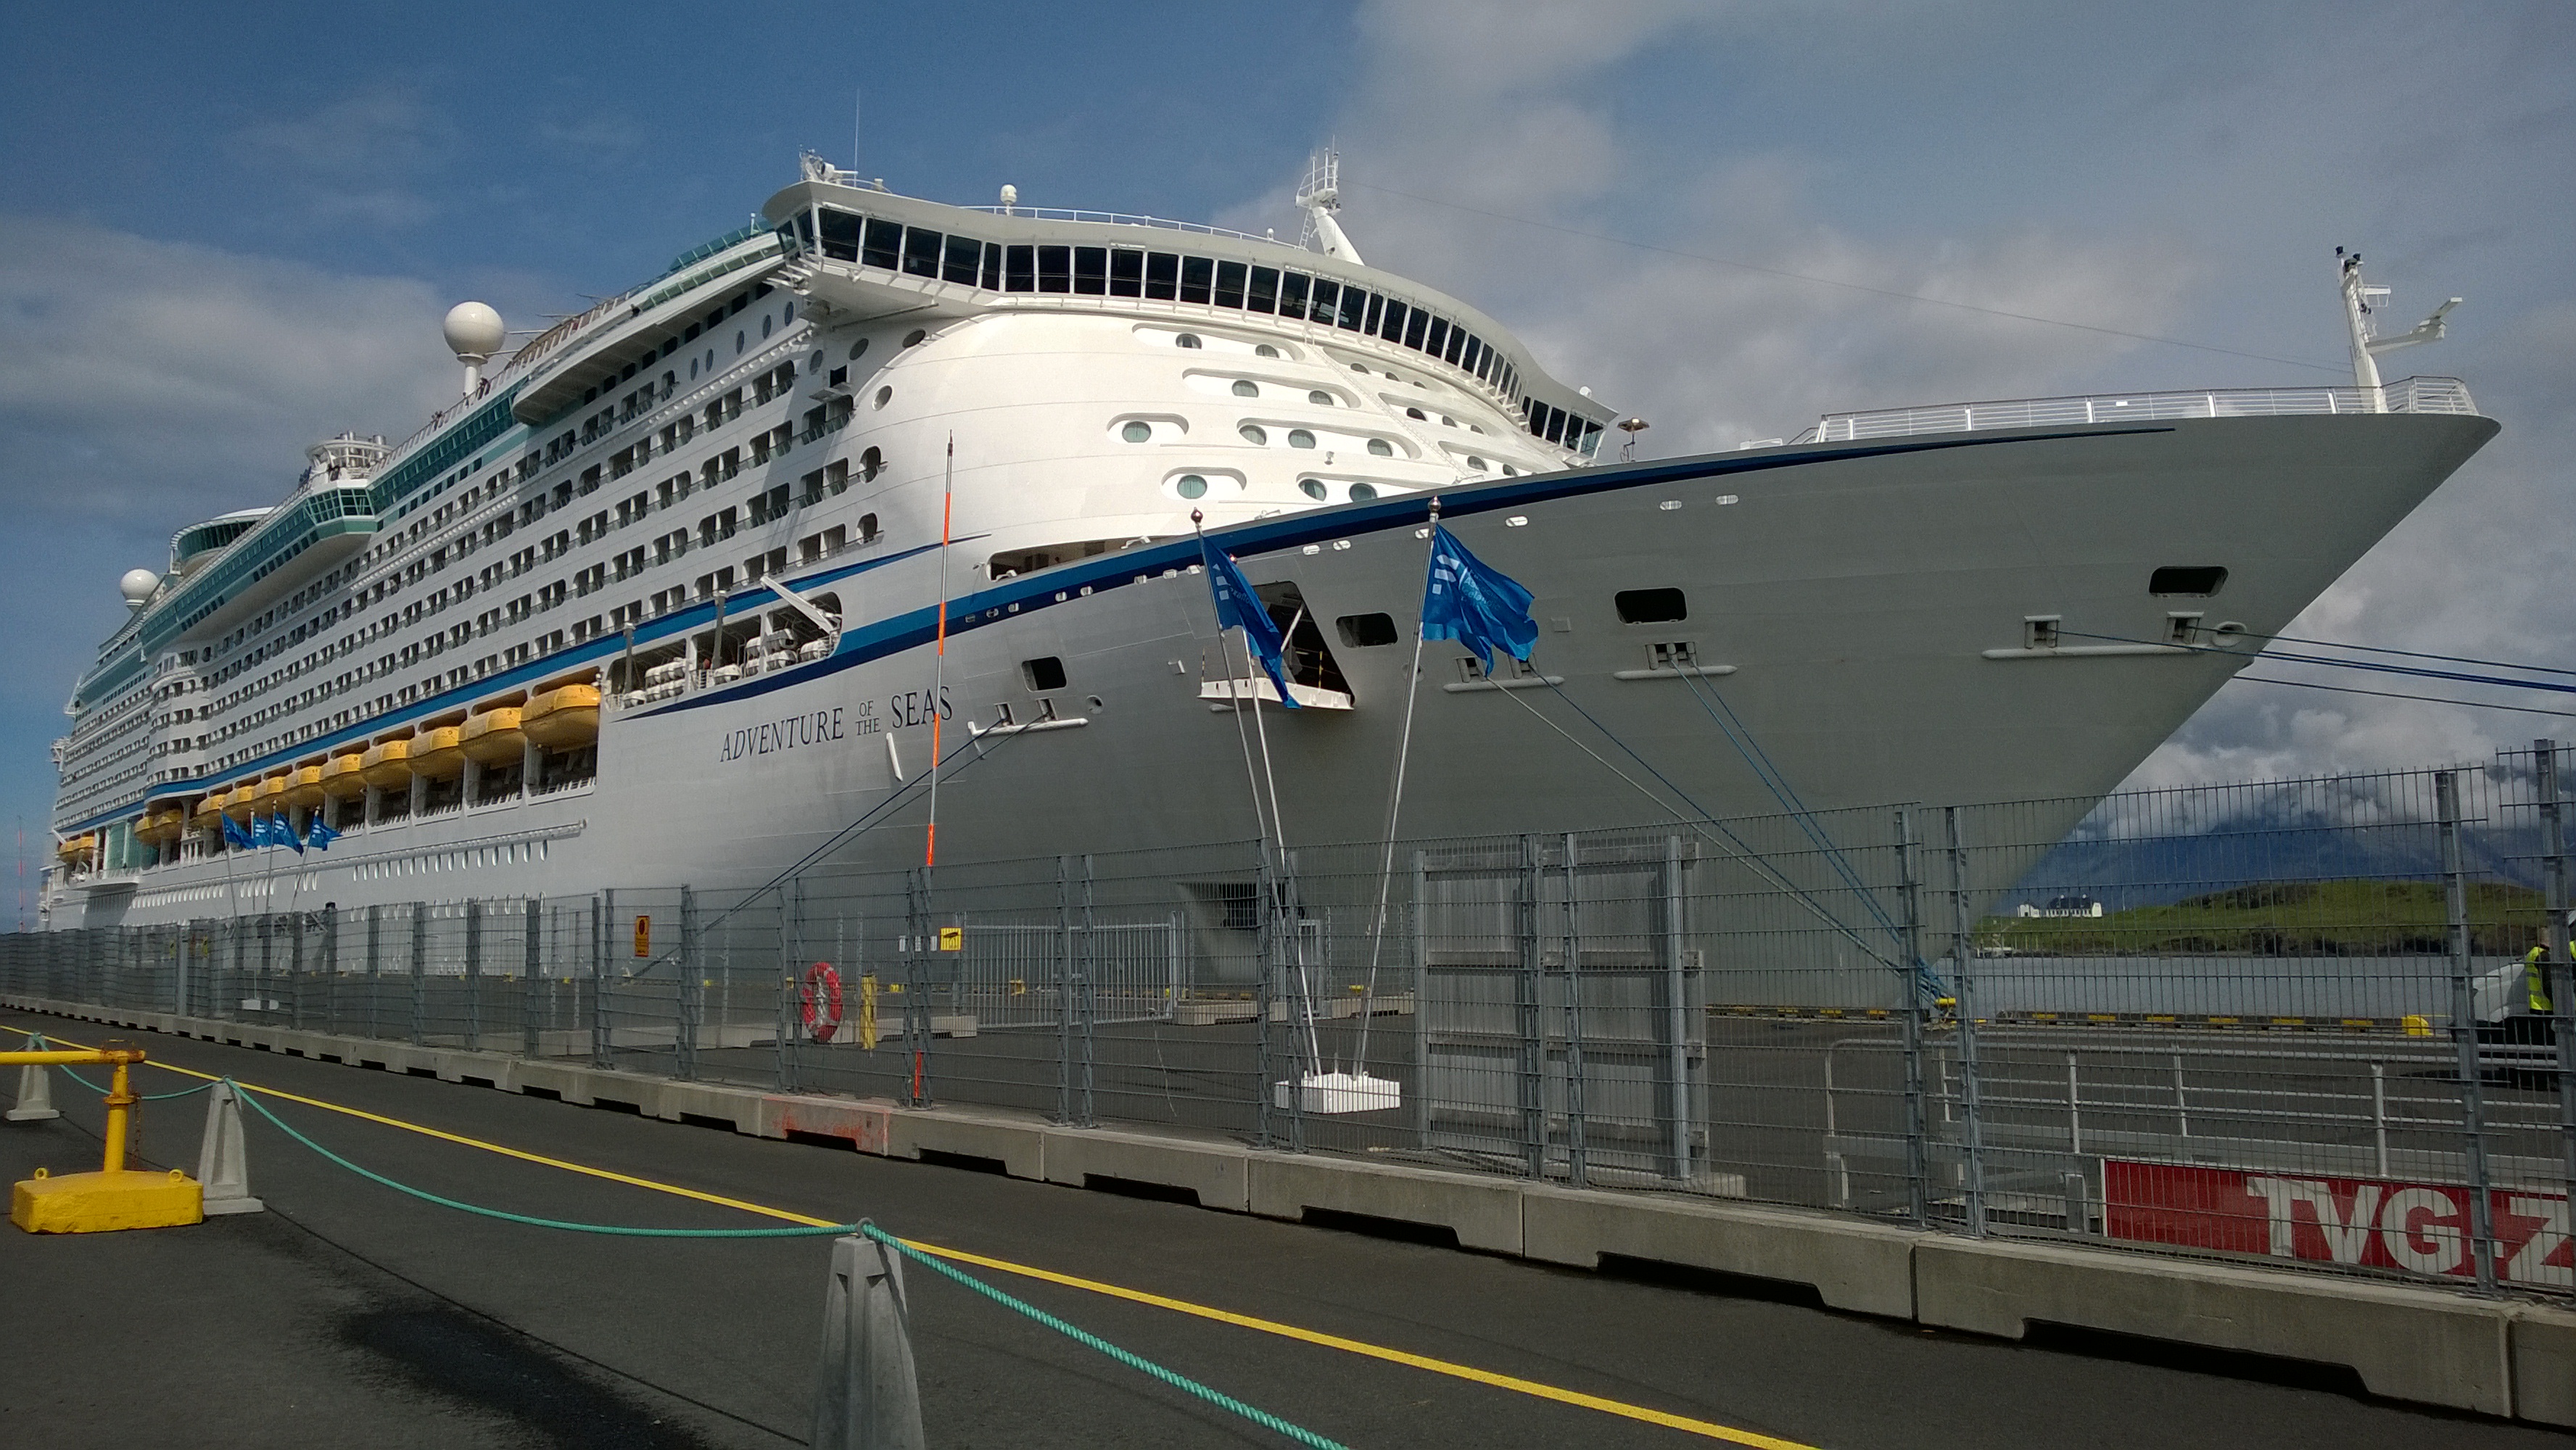 Cruise ship services in Iceland